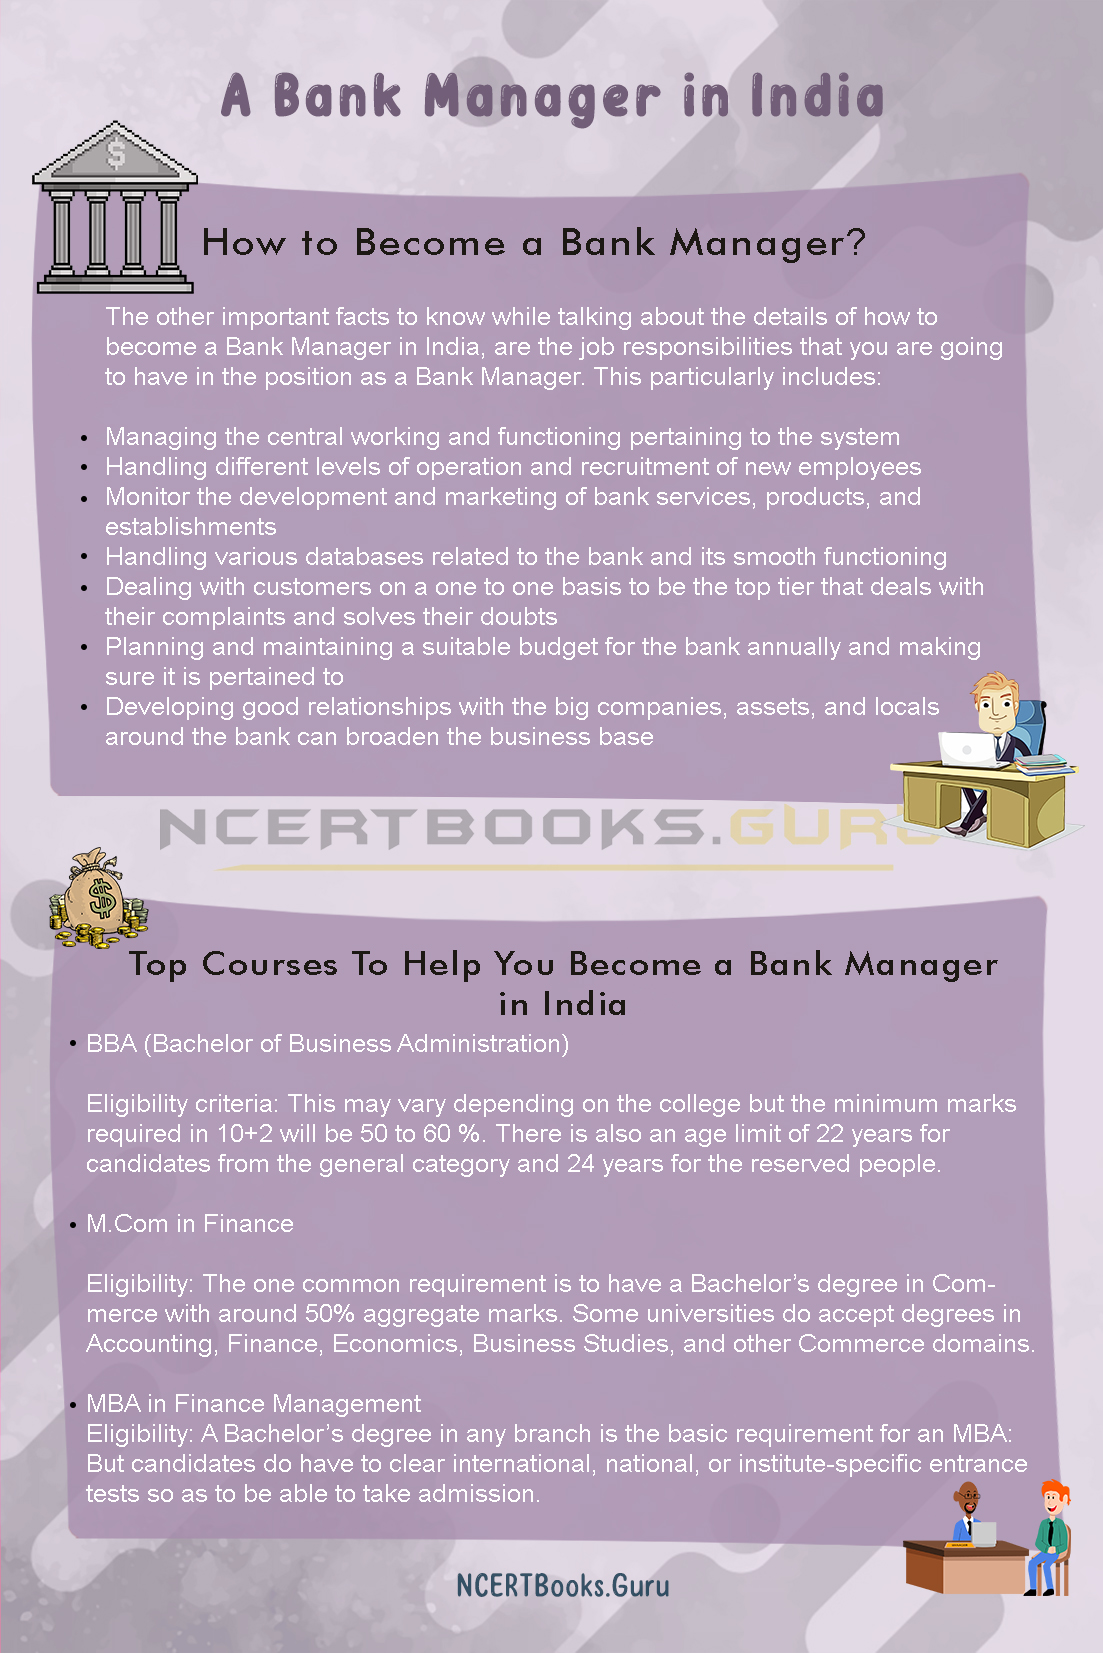 How to Become a Bank Manager in India